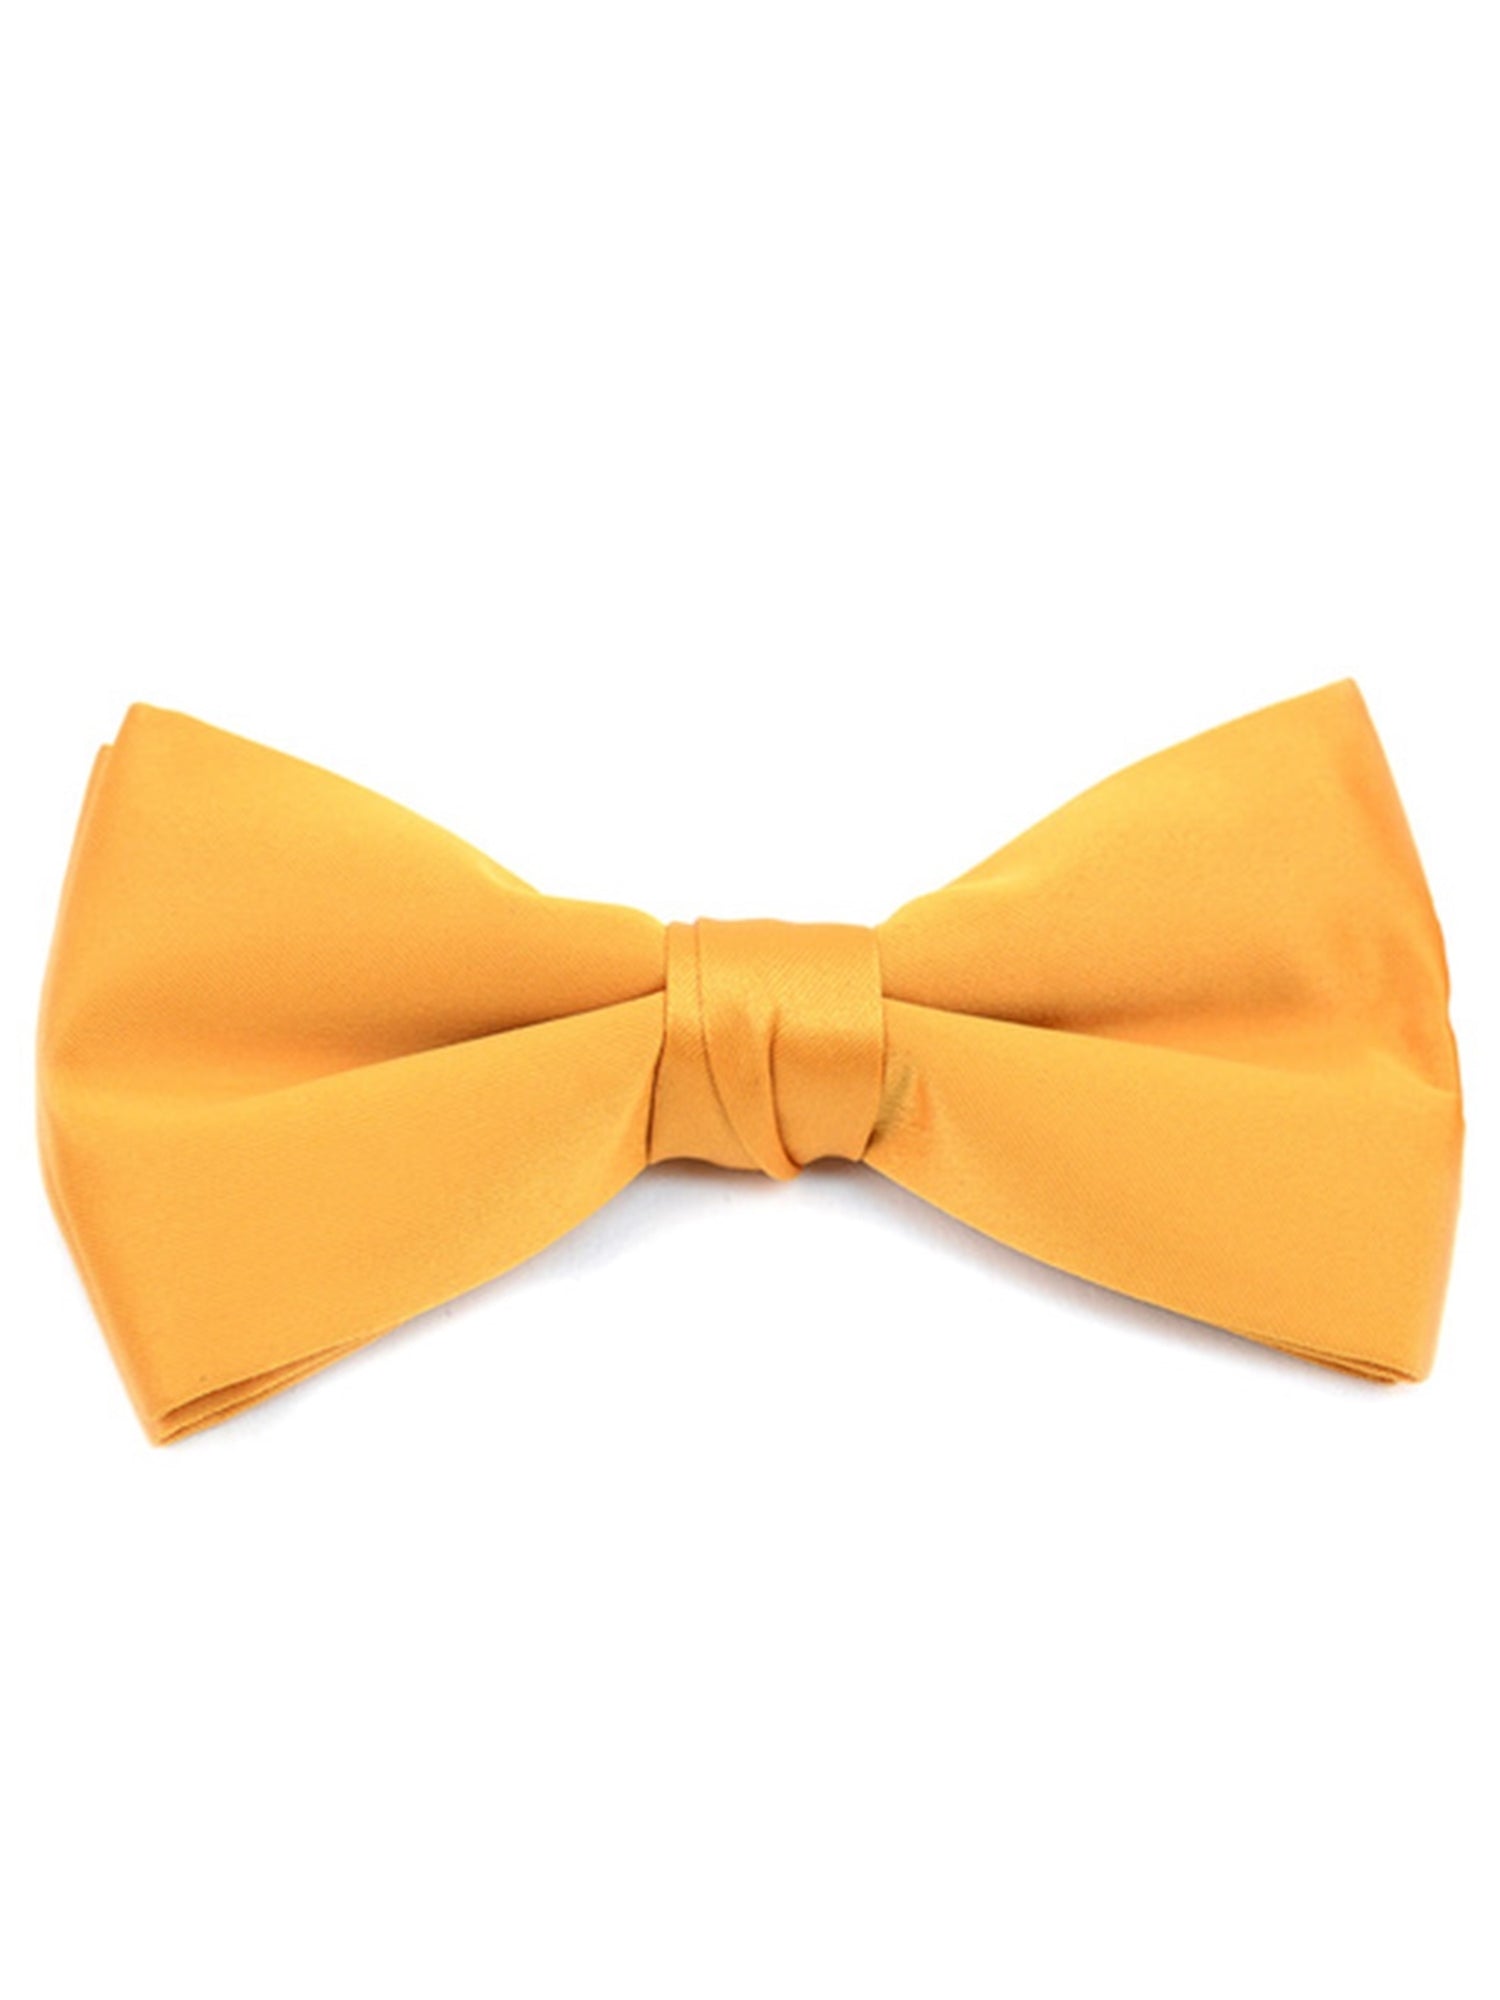 Men's Pre-tied Adjustable Length Bow Tie - Formal Tuxedo Solid Color Men's Solid Color Bow Tie TheDapperTie Gold One Size 